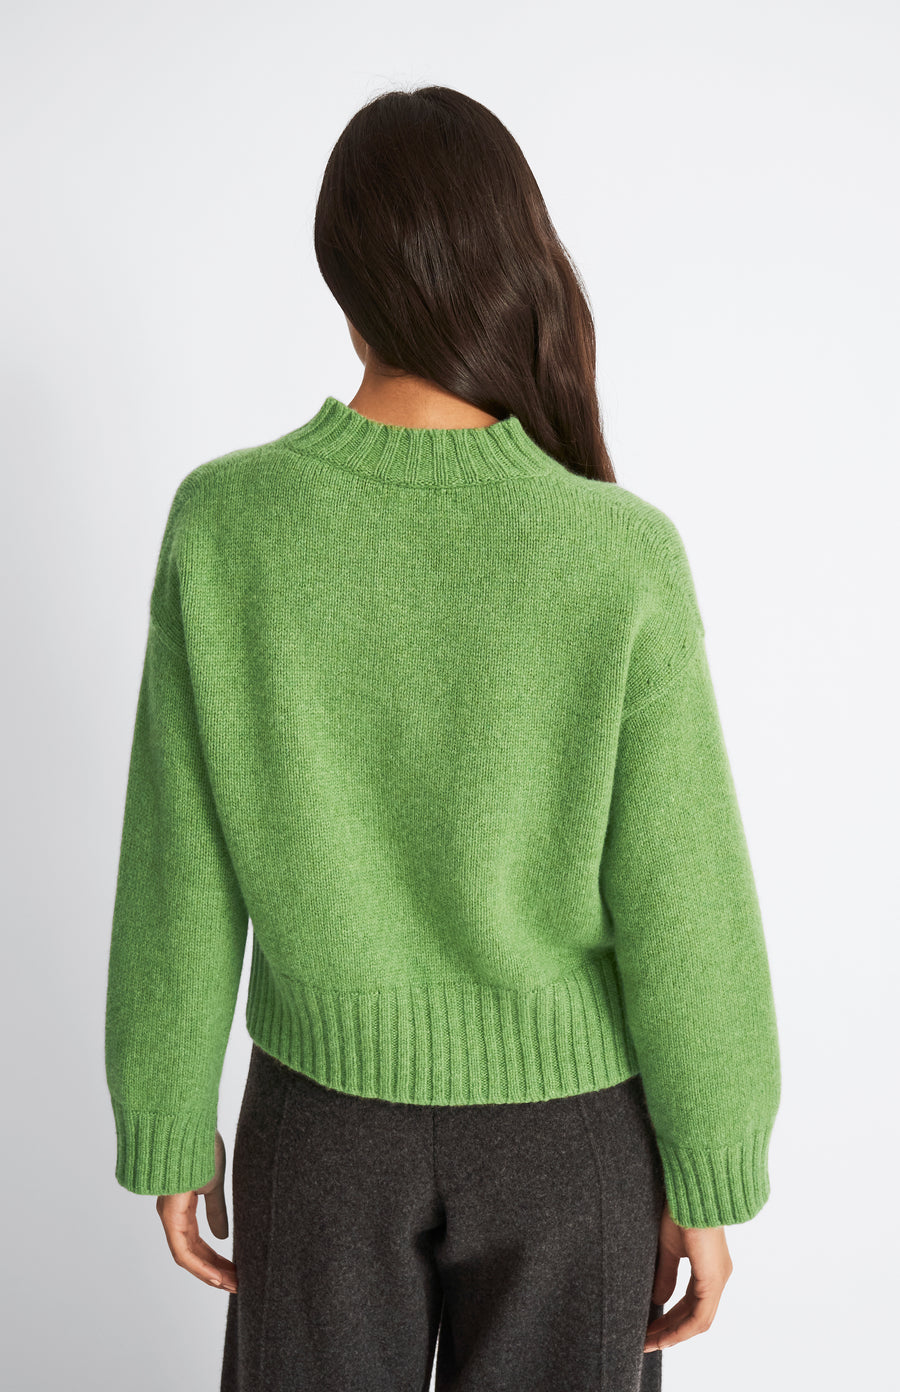 Pringle of Scotland Women's V Neck Cosy Cashmere Jumper In Wood Sage rear view